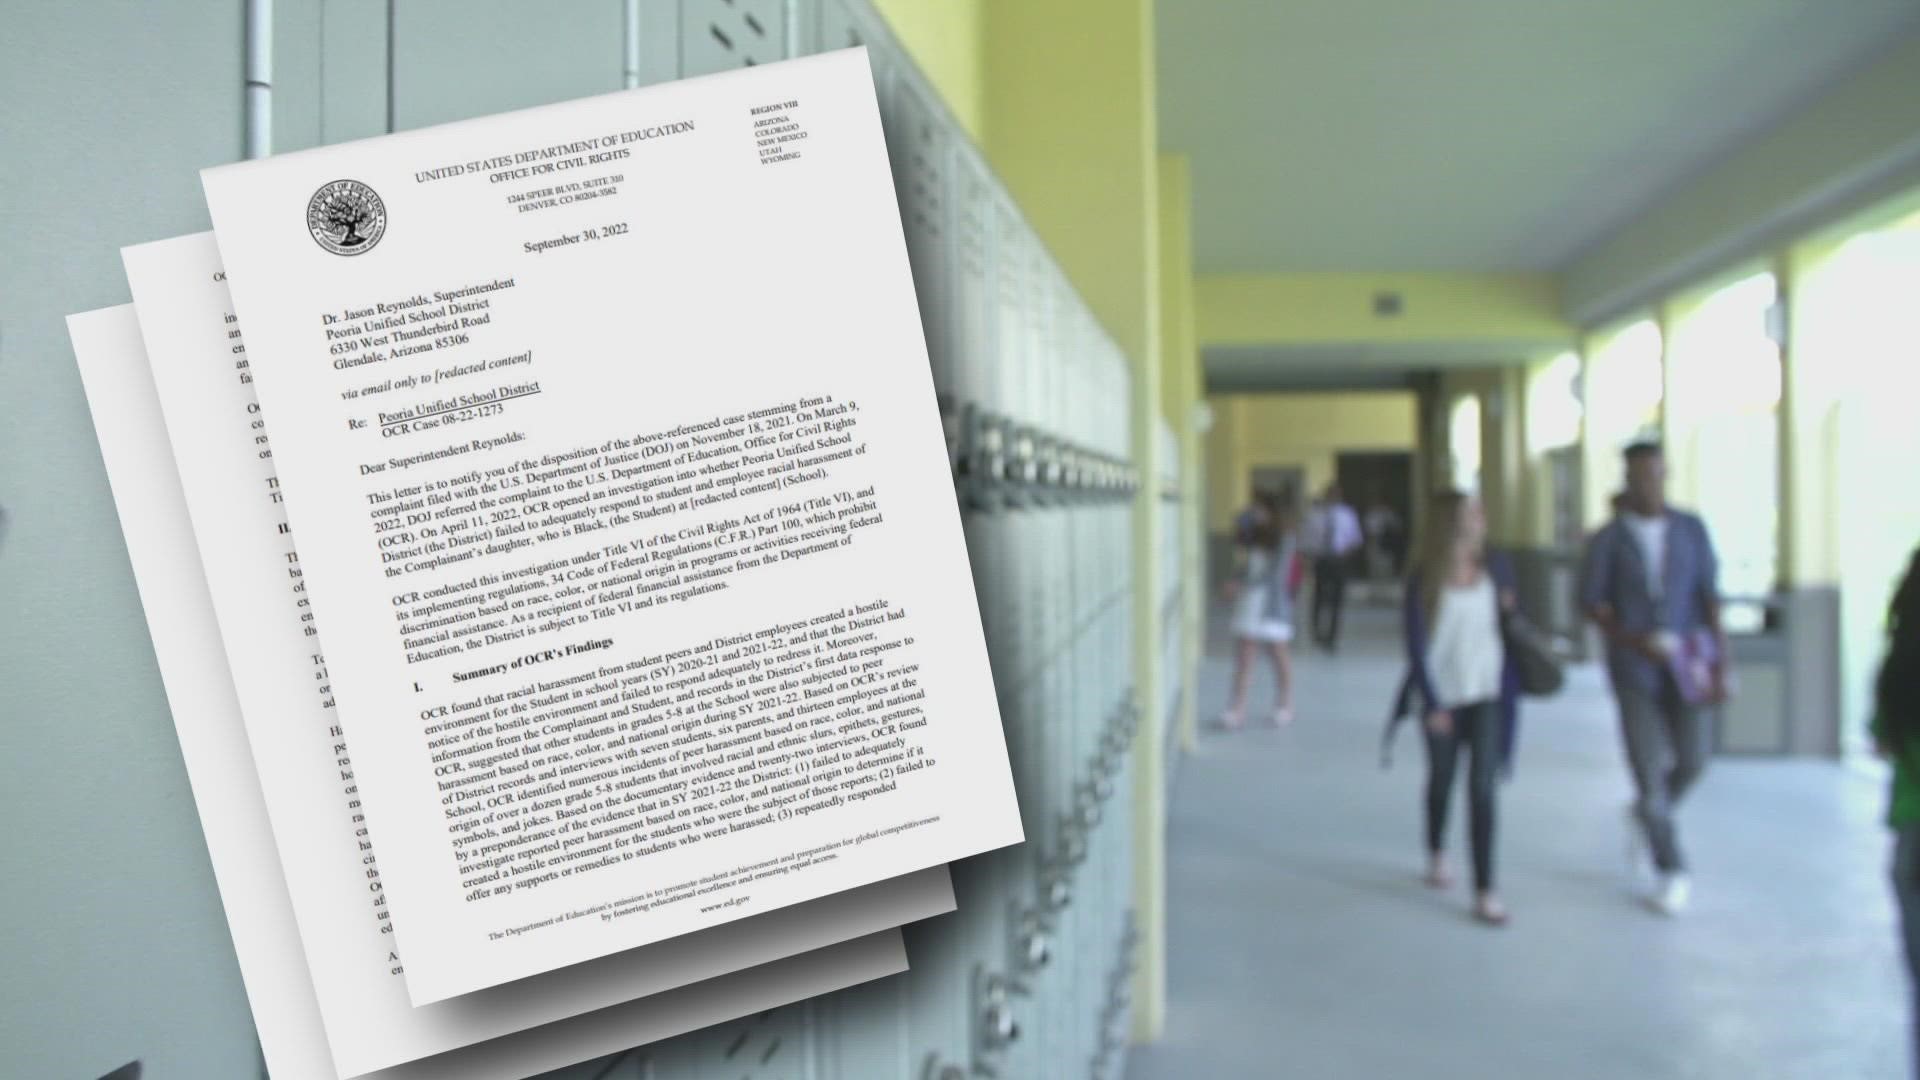 The U.S. Department of Education says students of color in the West Valley district have been subjected to racial harassment.